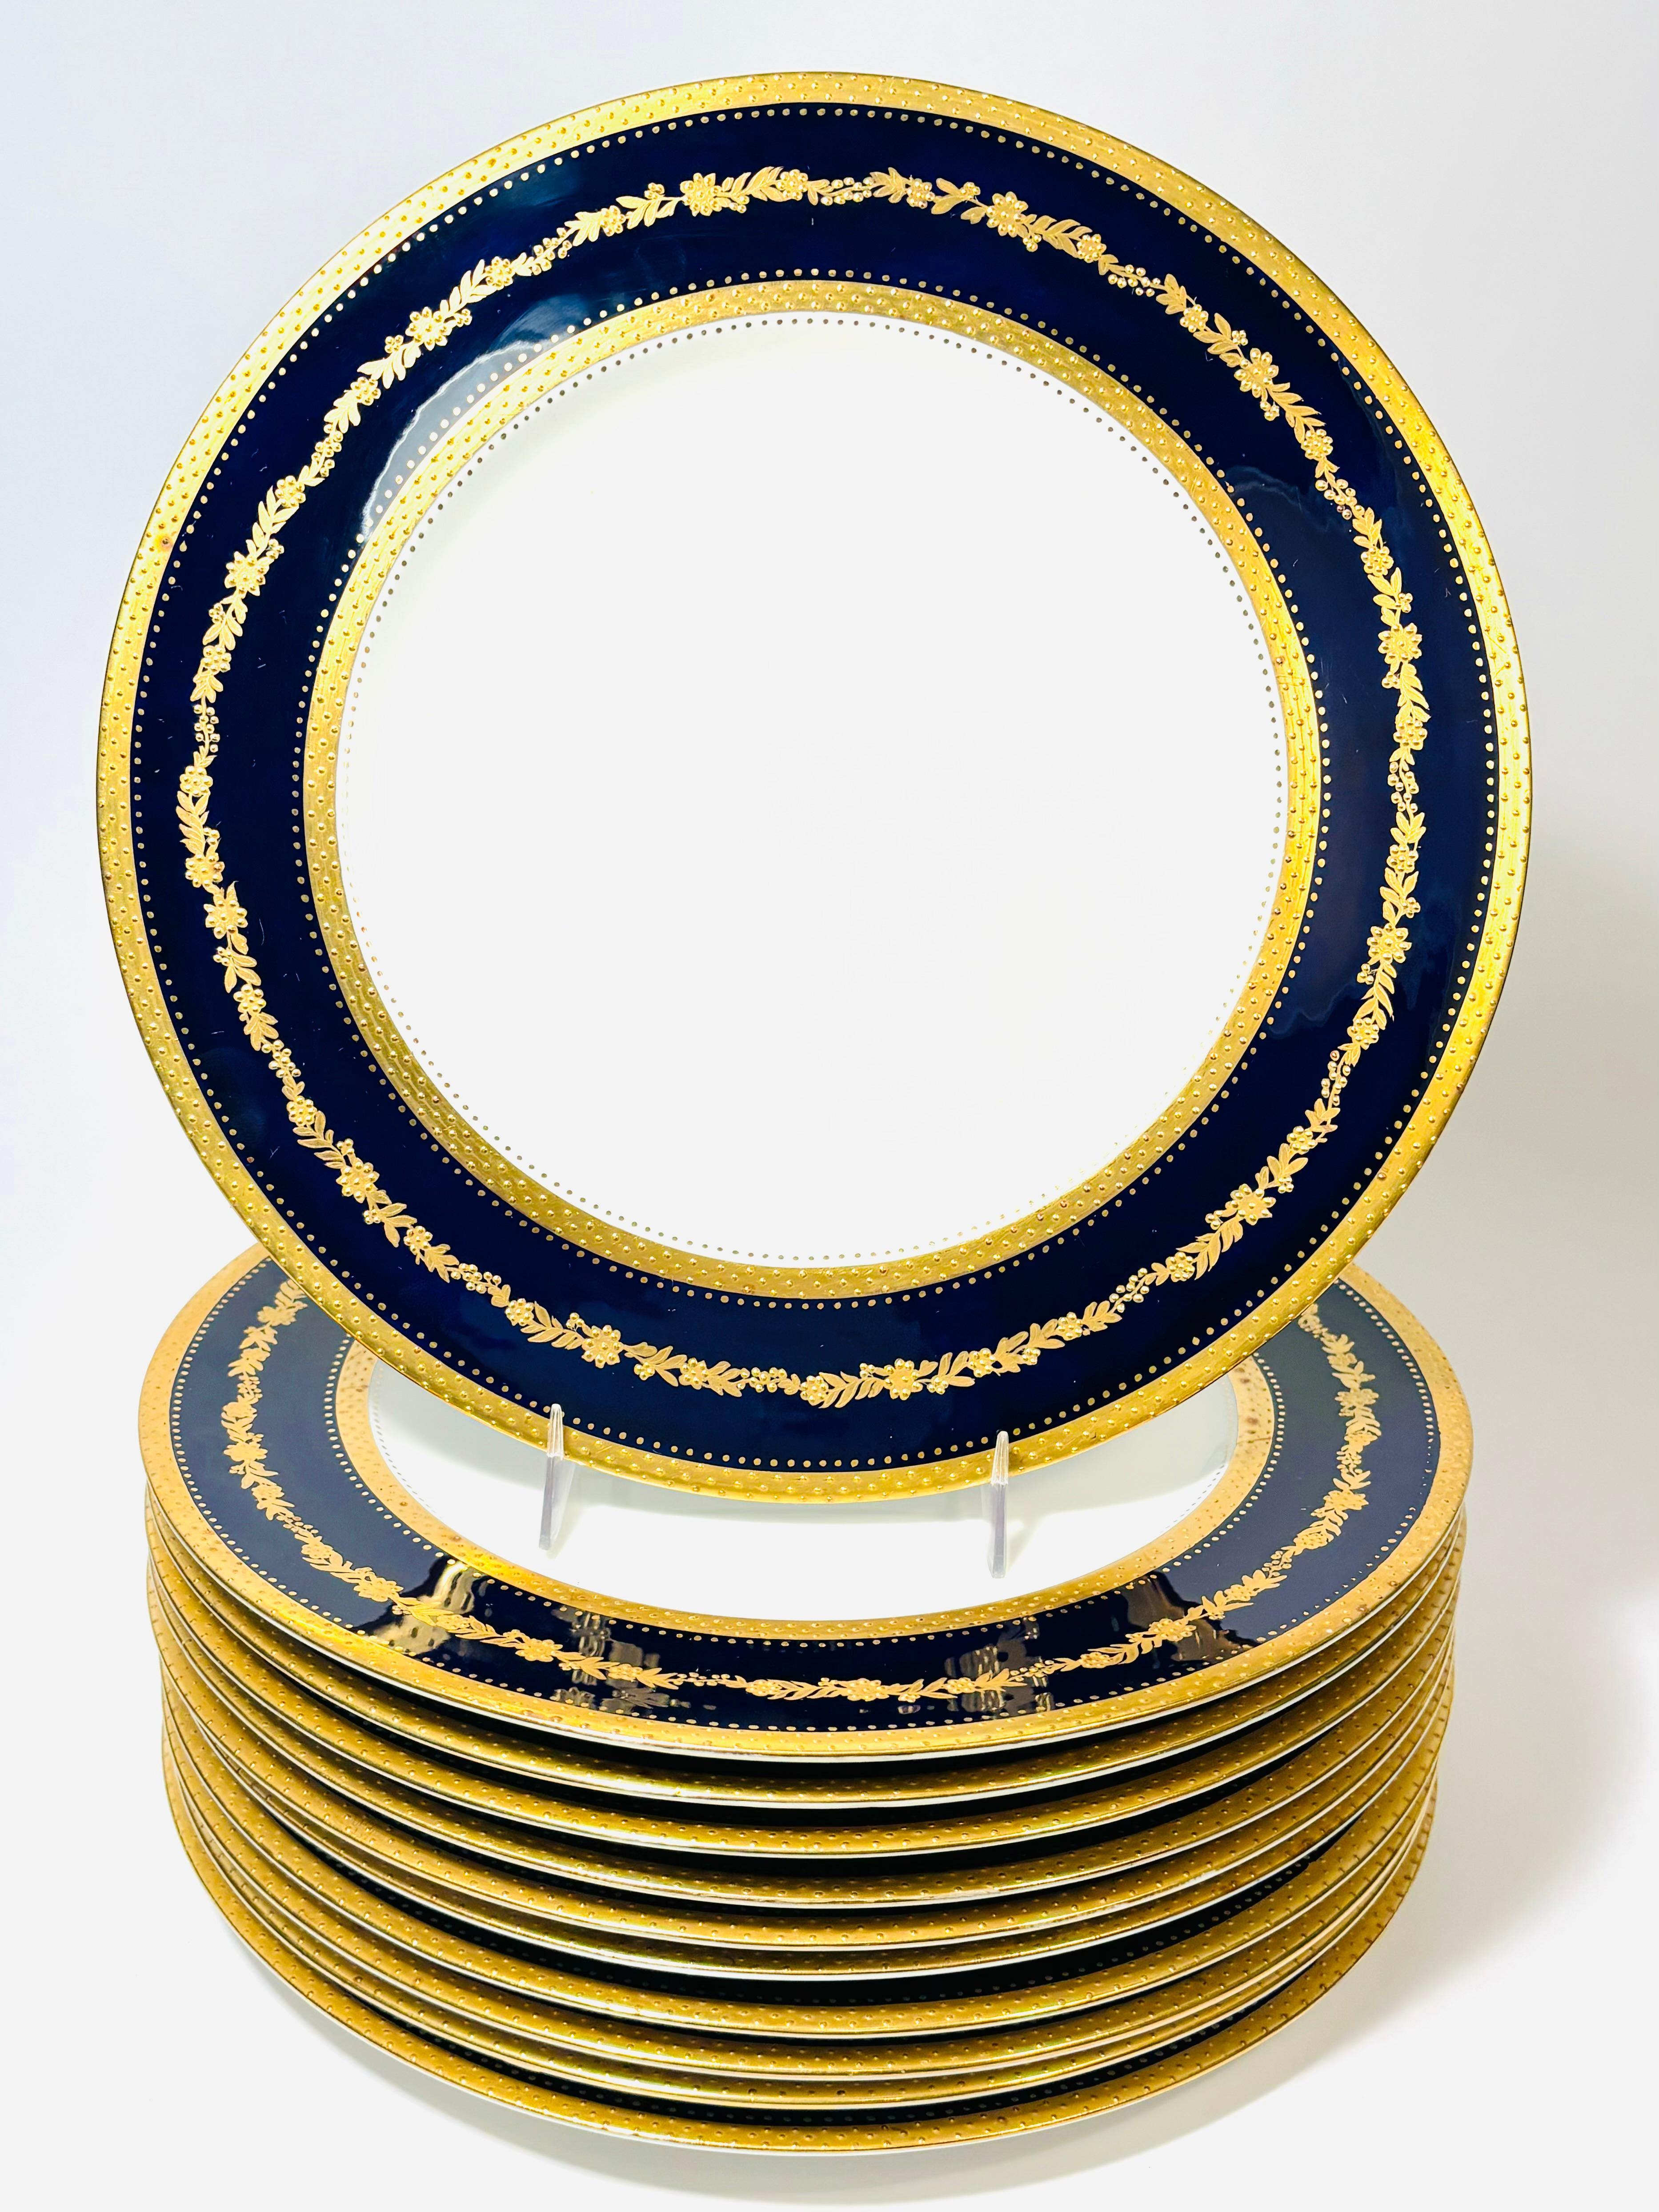 An elegant set of antique dinner plates from the re known firm of George Jones and custom ordered through the New York Gilded Age retailer Higgins & Seiter. A lovely pattern of raised tooled gold is set nicely in its cobalt blue collar. Crisp white